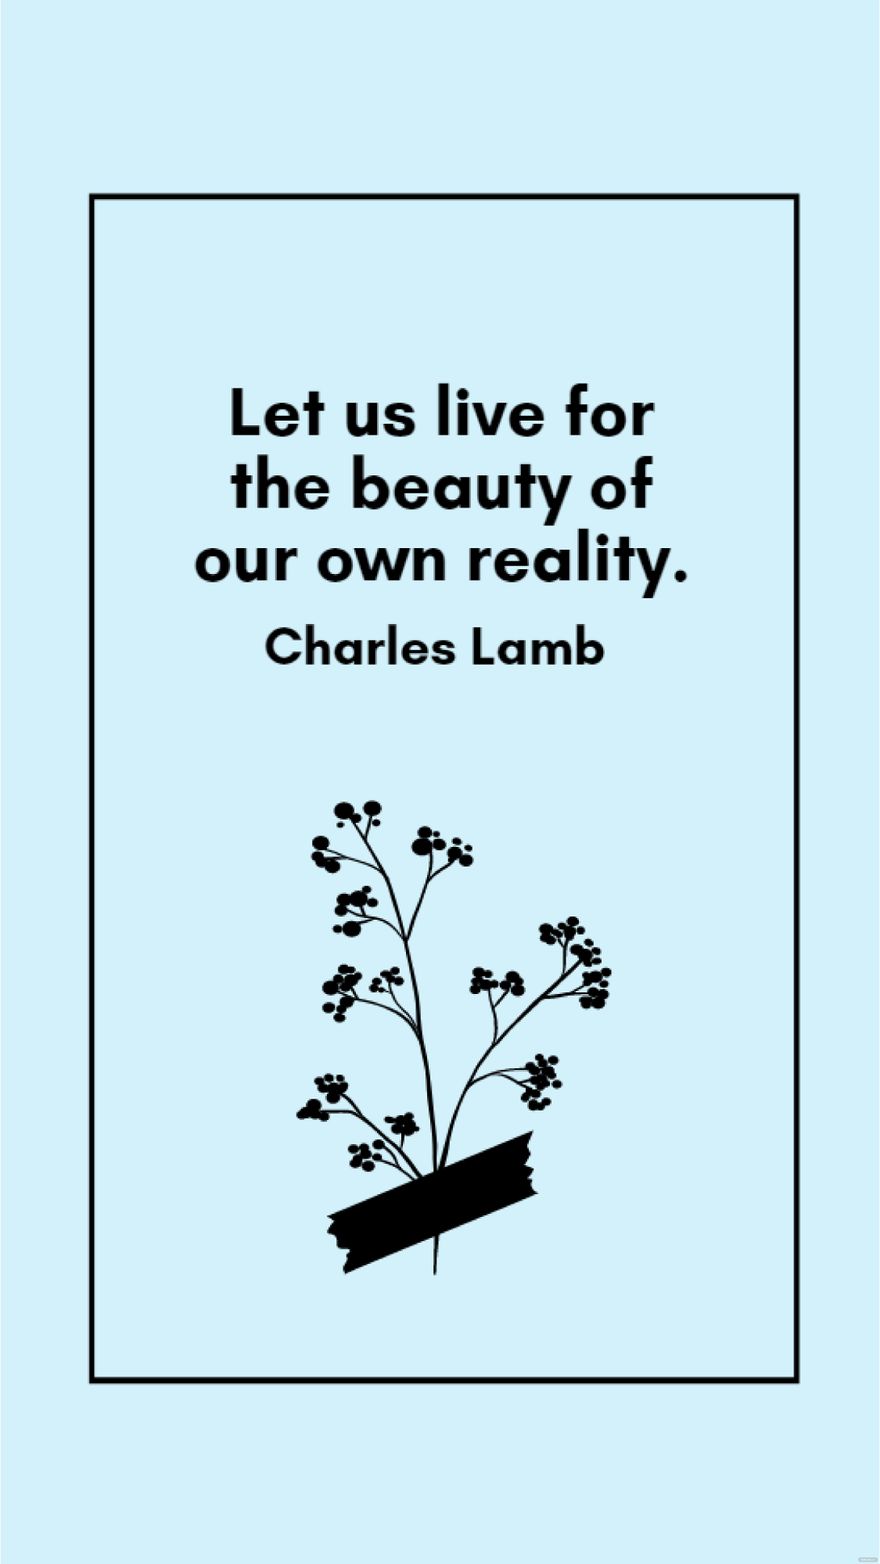 Charles Lamb - Let us live for the beauty of our own reality. in JPG